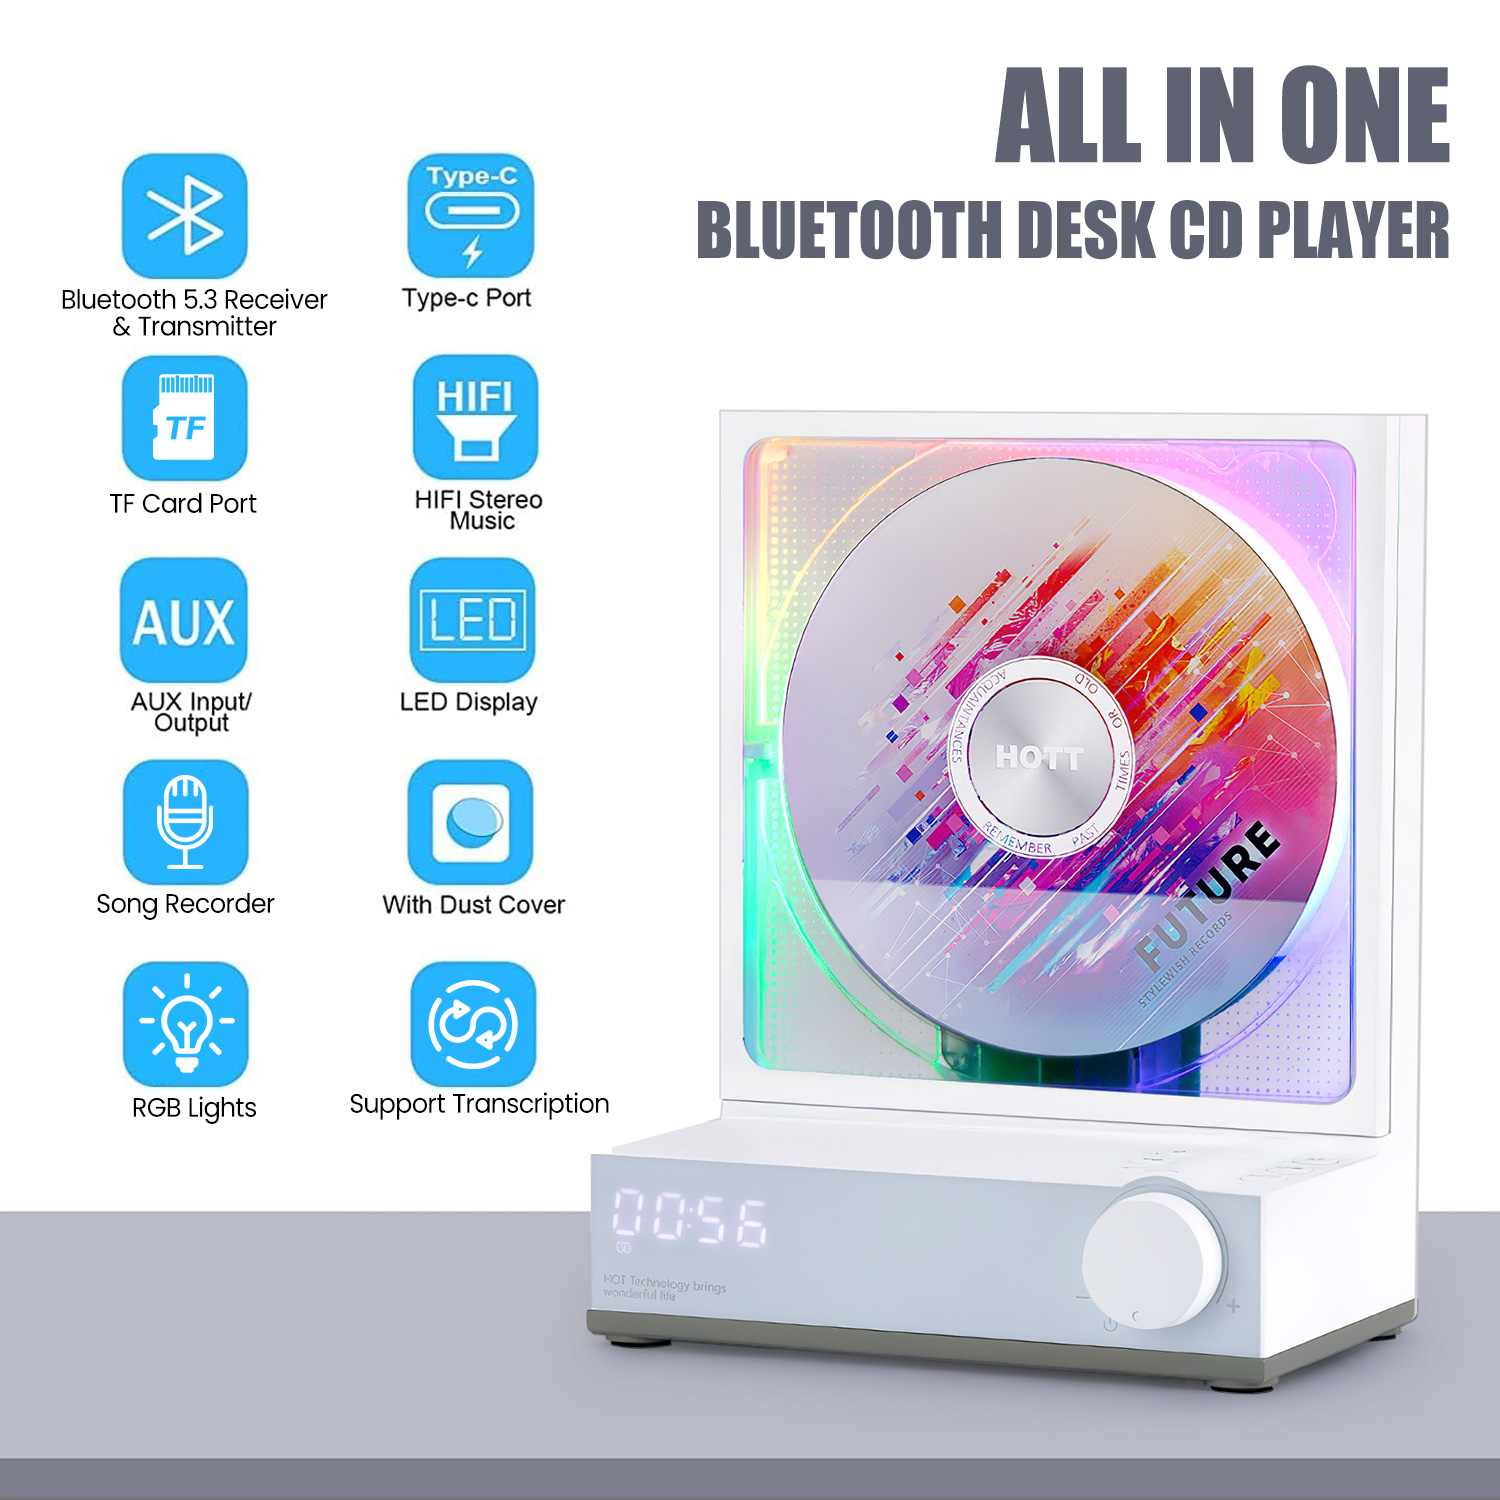 HOTT CD Player Portable Bluetooth Desktop CD Player for Home with Timer Built-in HiFi Speakers Radio CD Player with LCD Display RGB Light Support AUX USB TF Card Playback,CD Disc Transcript To TF Card - image 2 of 9